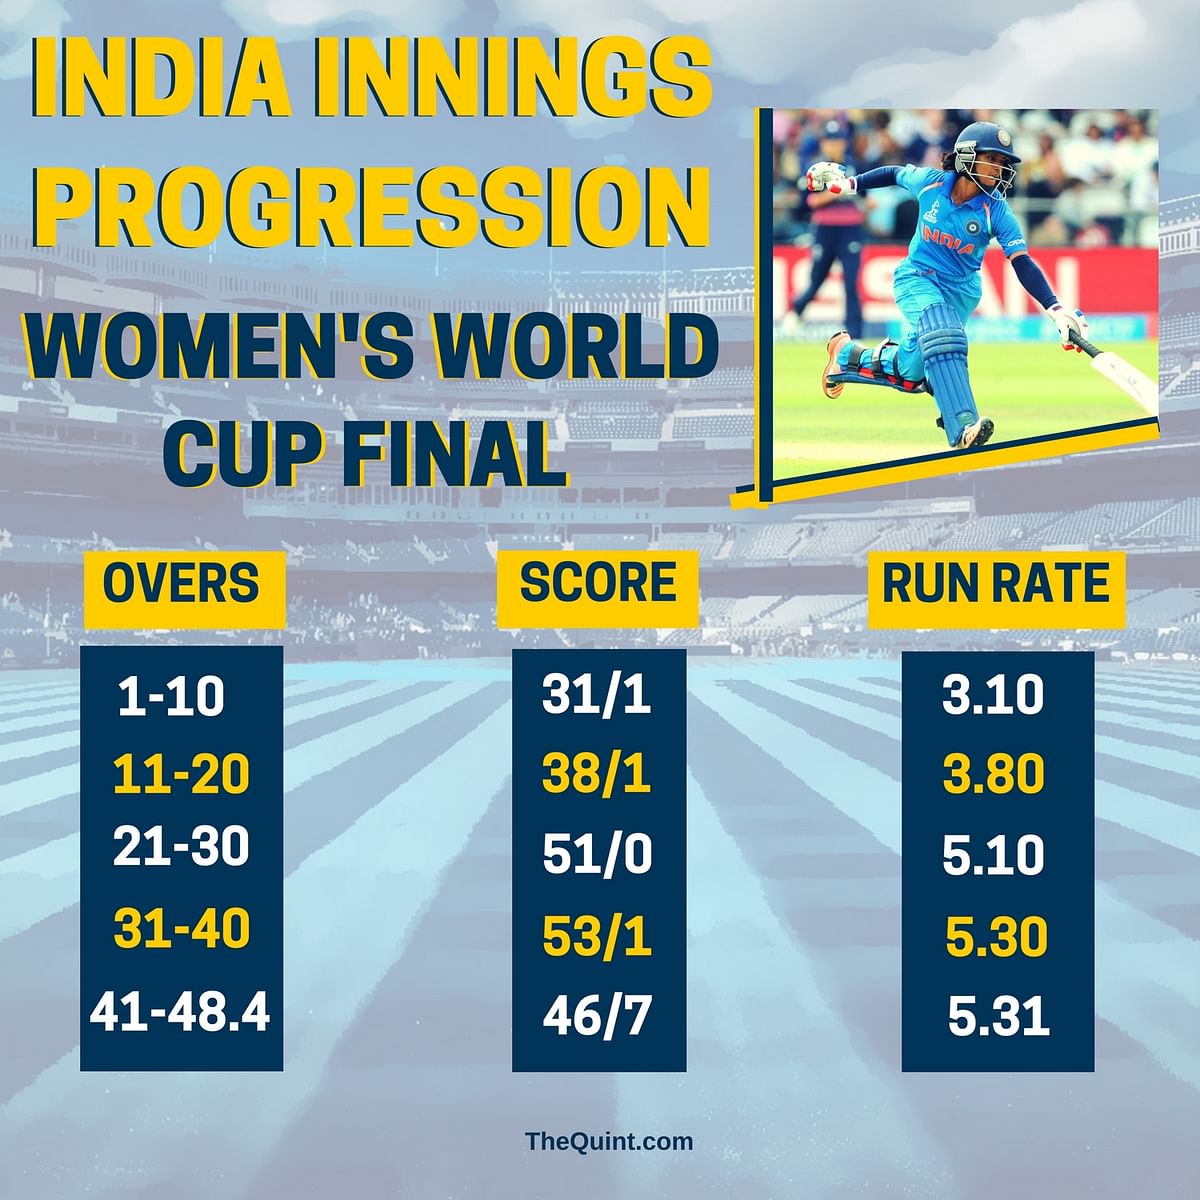 Here’s a look at the World Cup final between India and England through some interesting numbers.